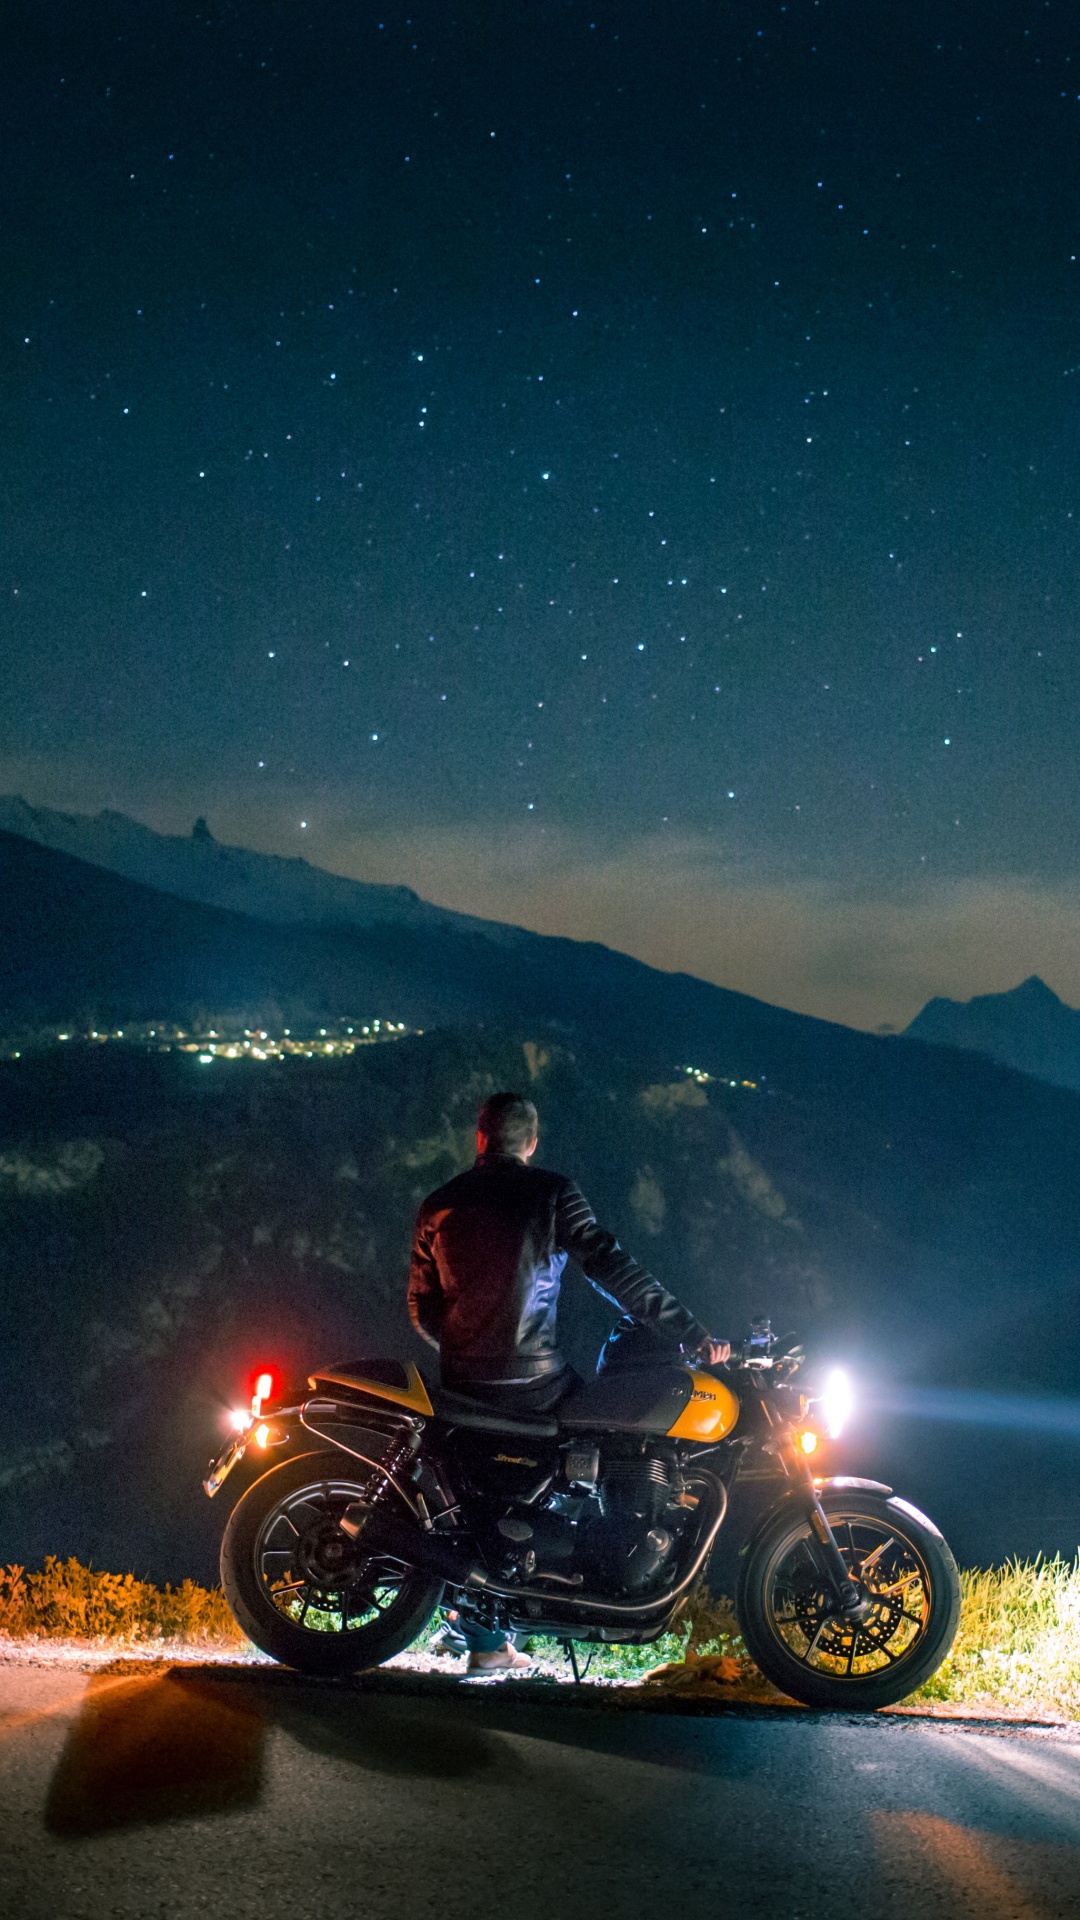 Man Riding Motorcycle on Road During Night Time. Wallpaper in 1080x1920 Resolution